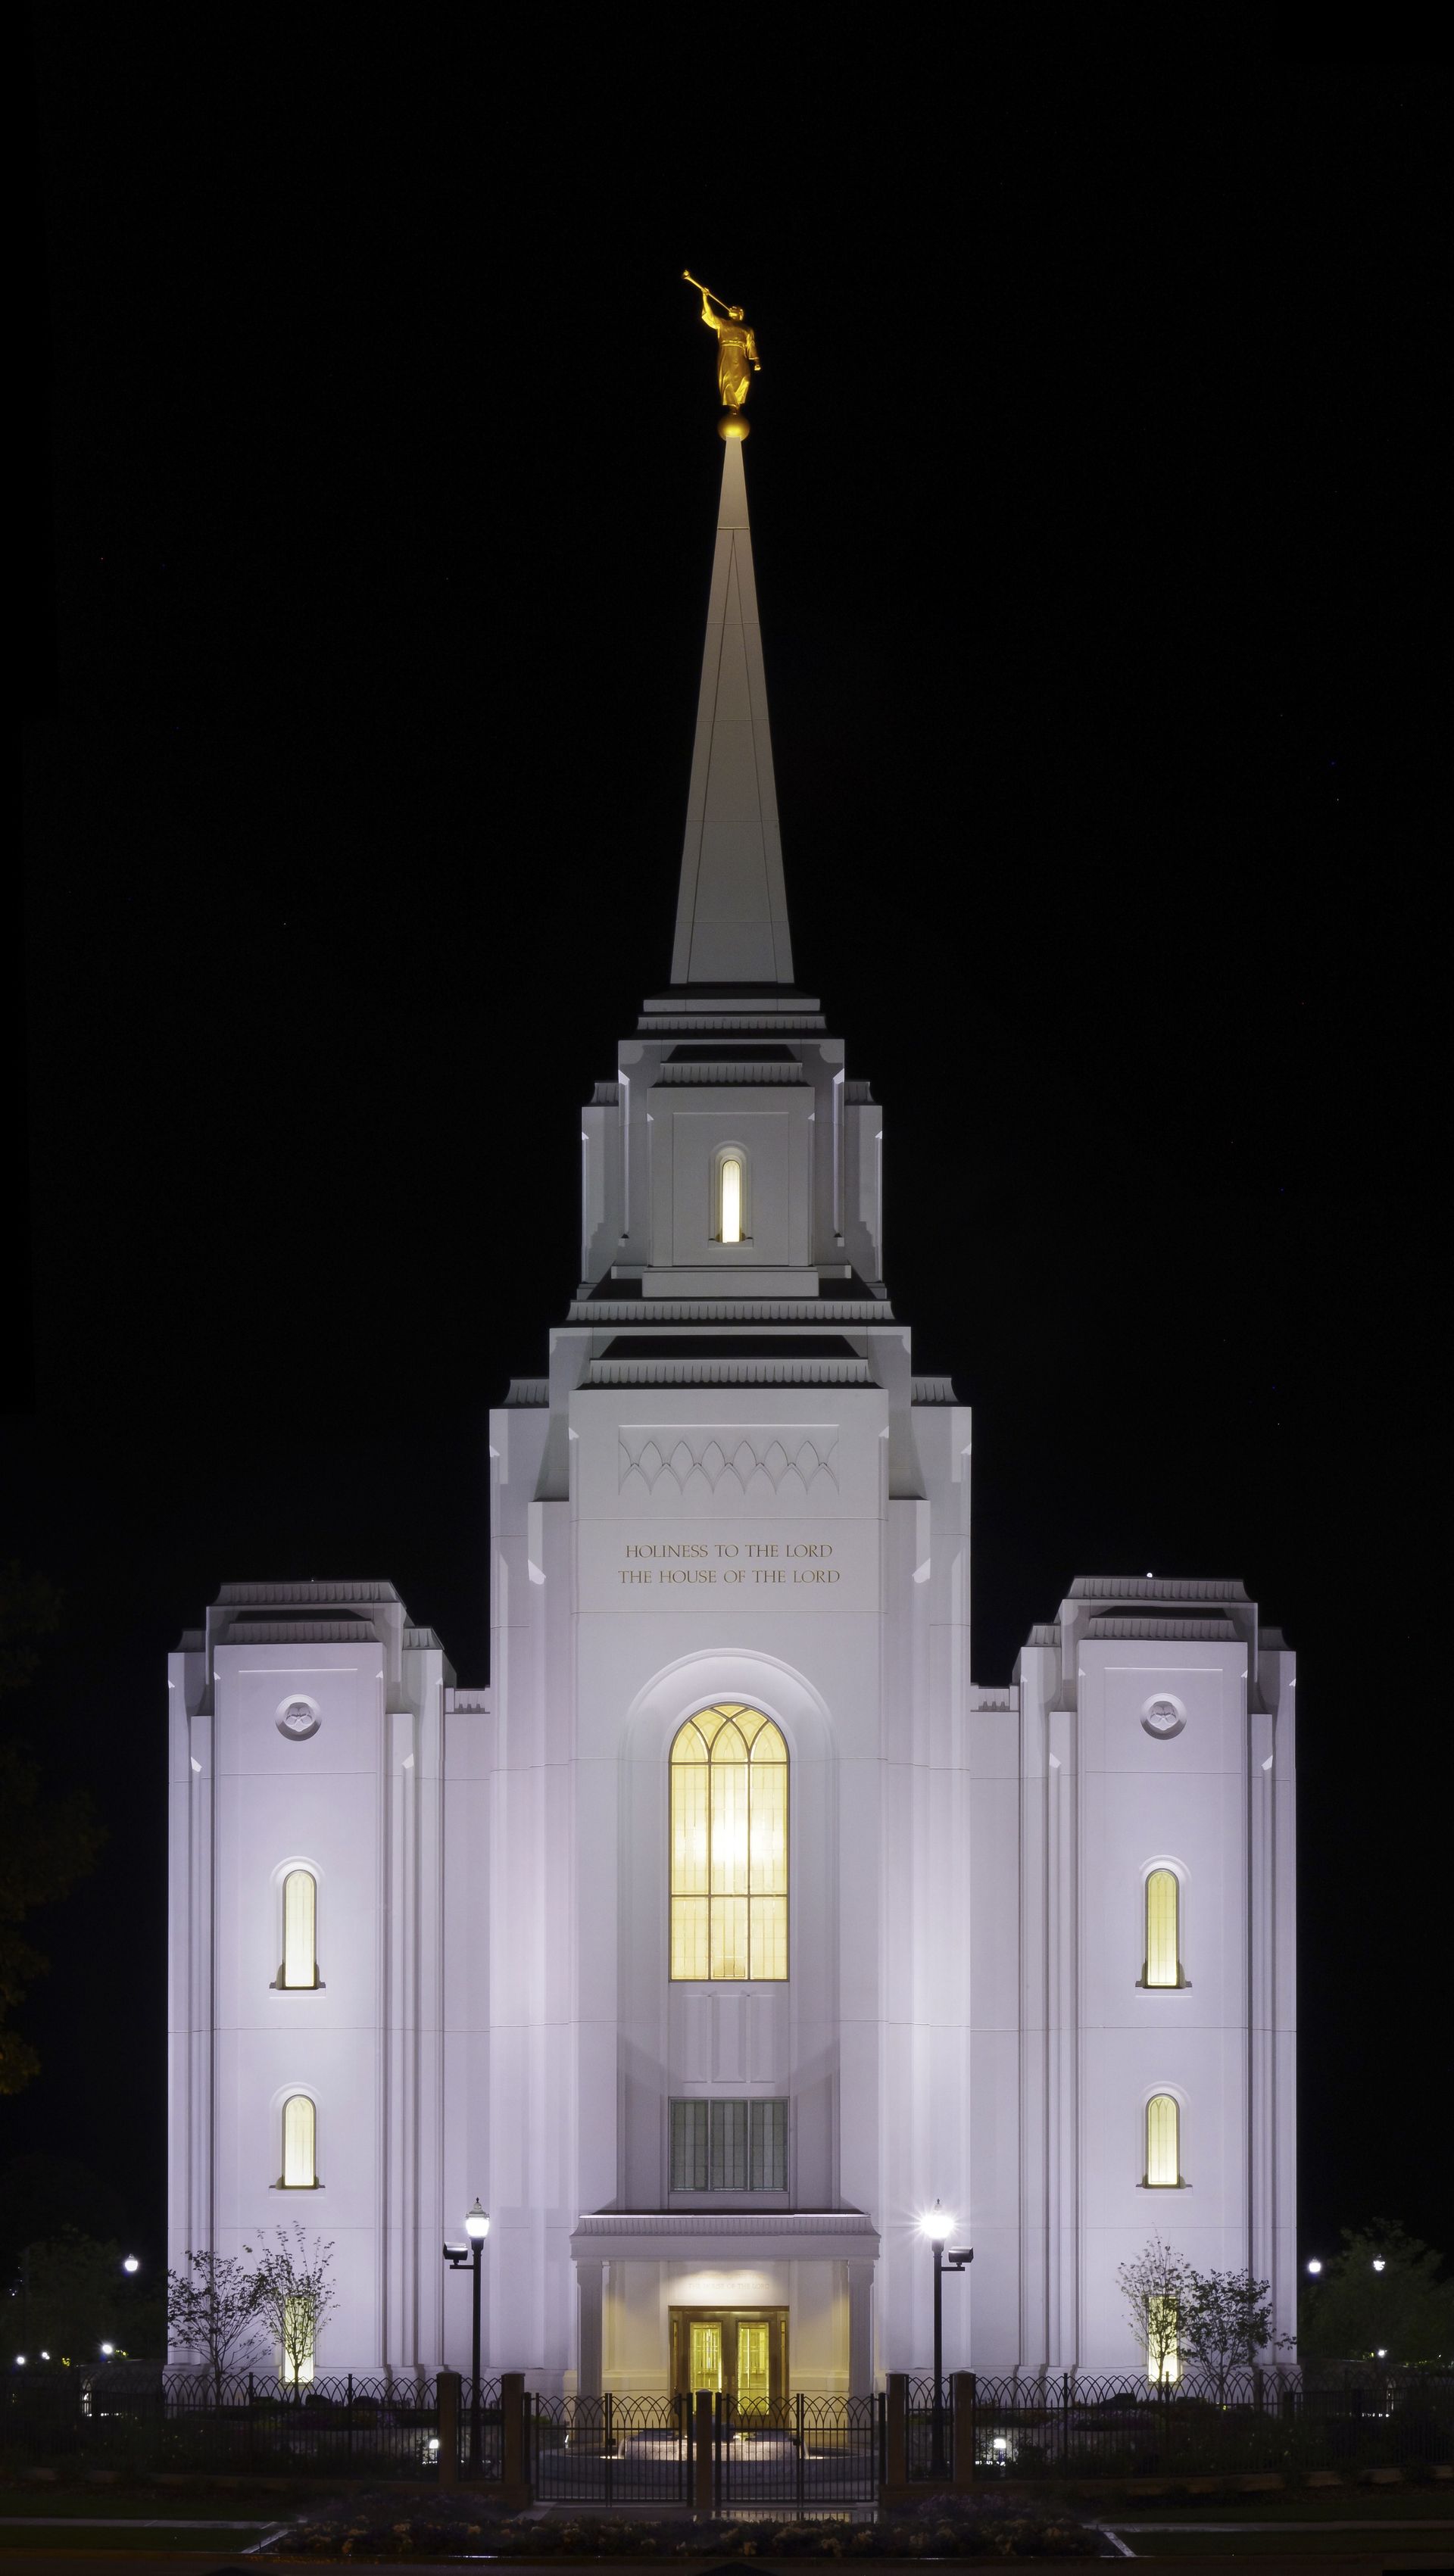 The Brigham City Utah Temple lit up in the evening.